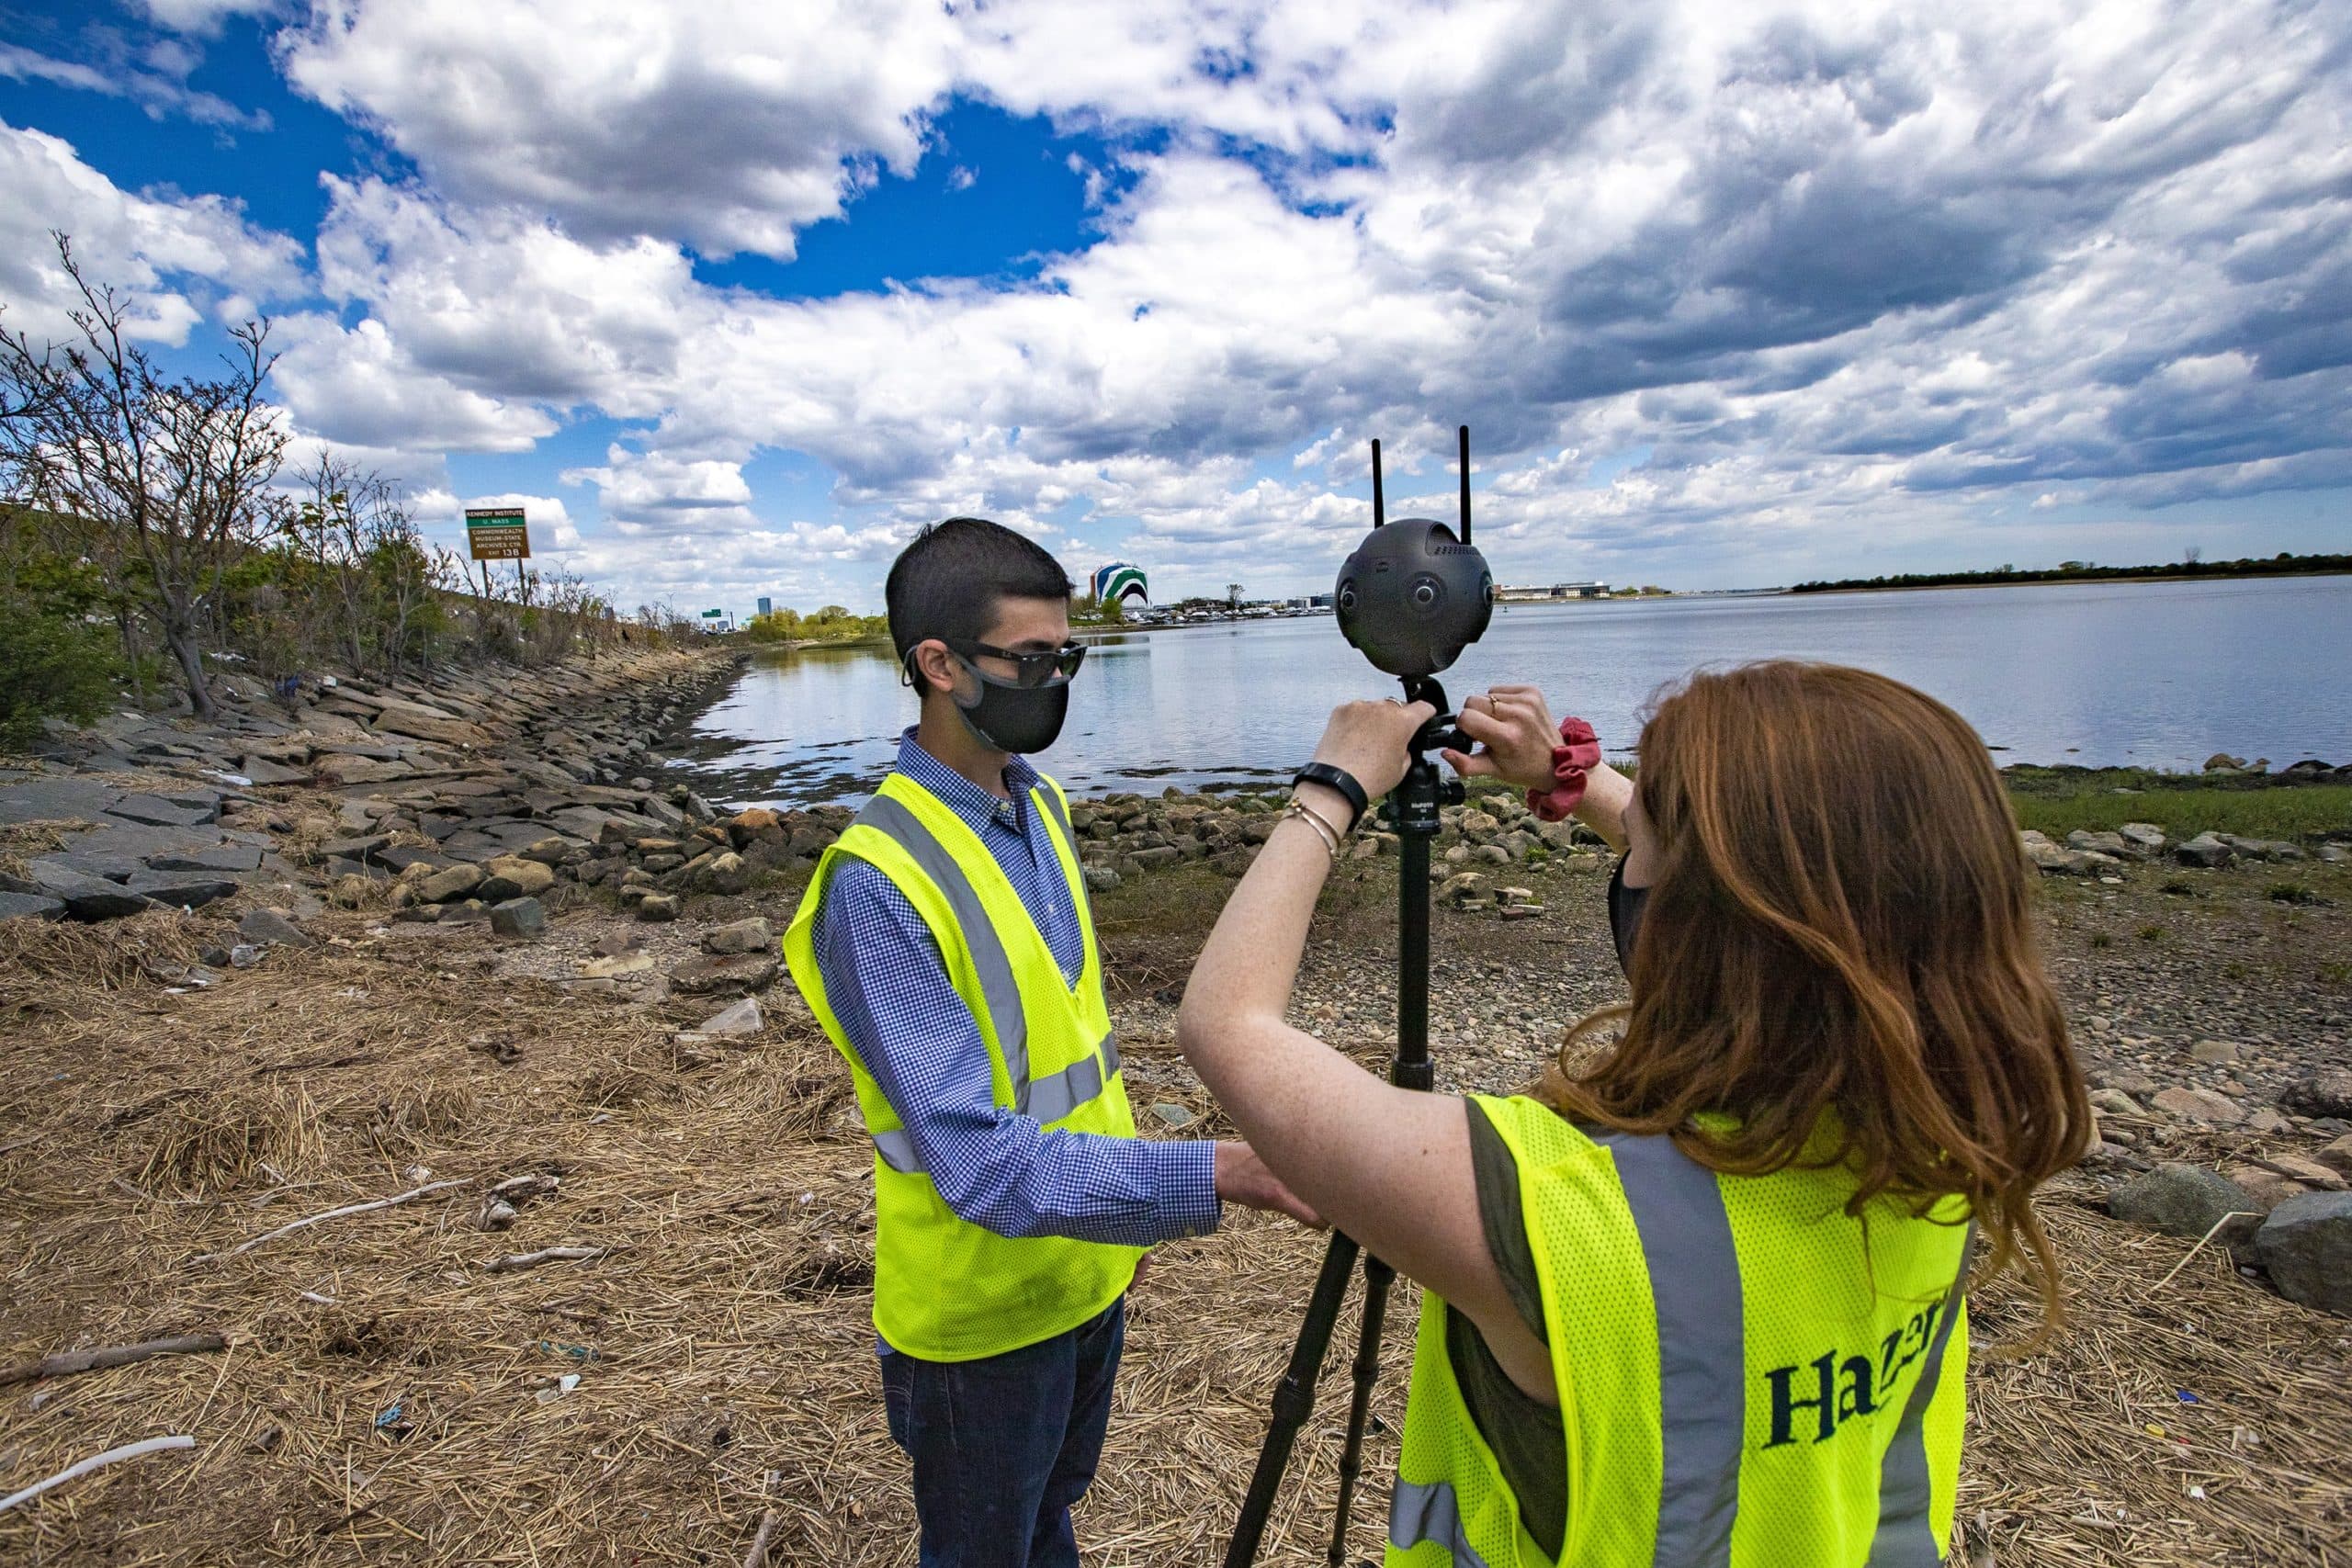 Engineers Ben Agrawal and Madison Gleason set up a 360 camera to survey the area along the Neponset River by Tenean Beach in Dorchester. (Jesse Costa/WBUR)